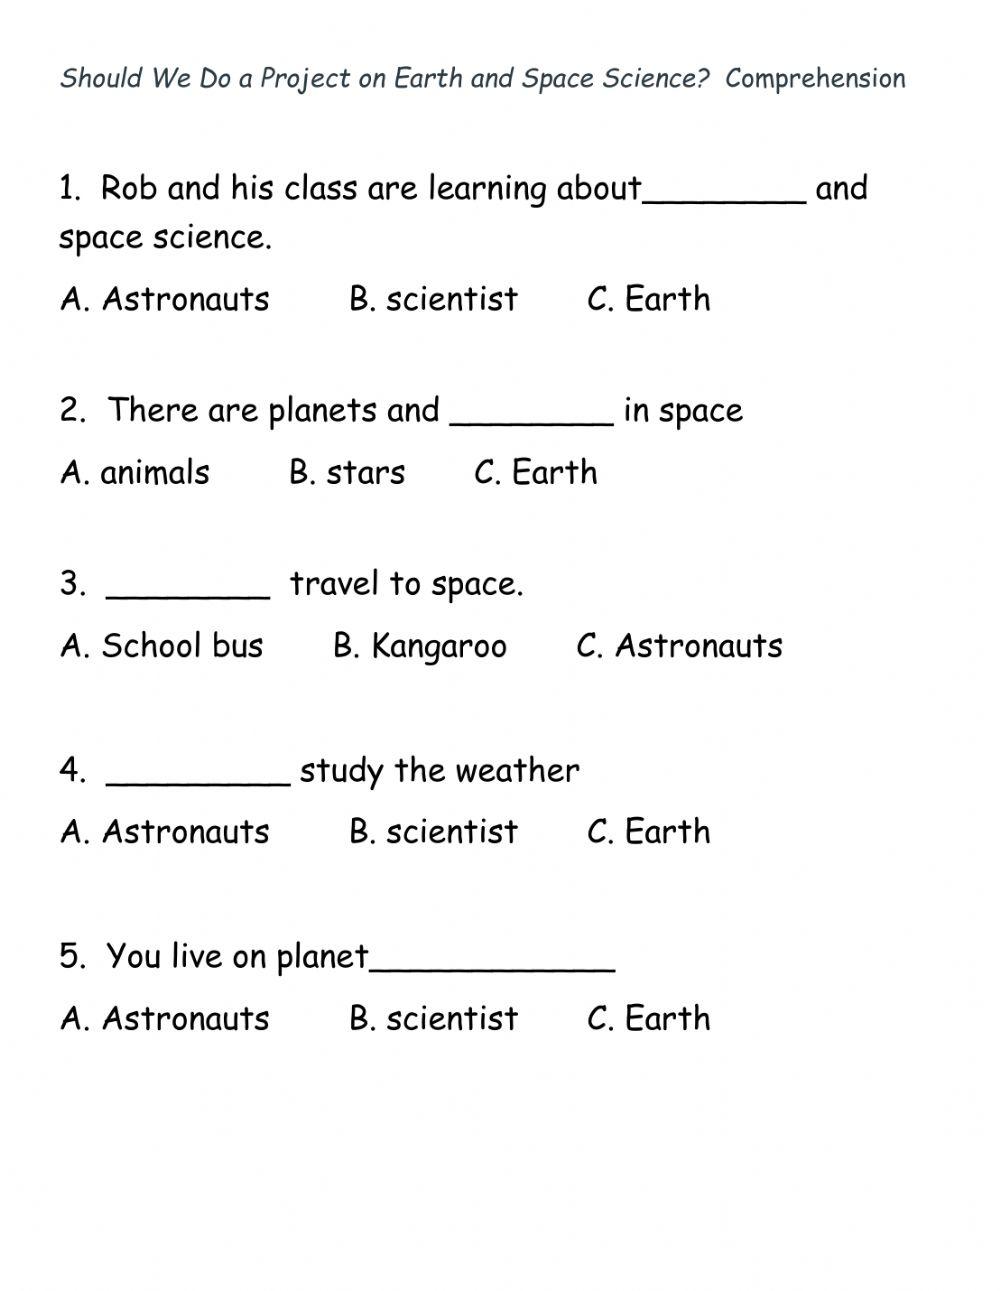 Should We do a Project on Earth and Space-comp